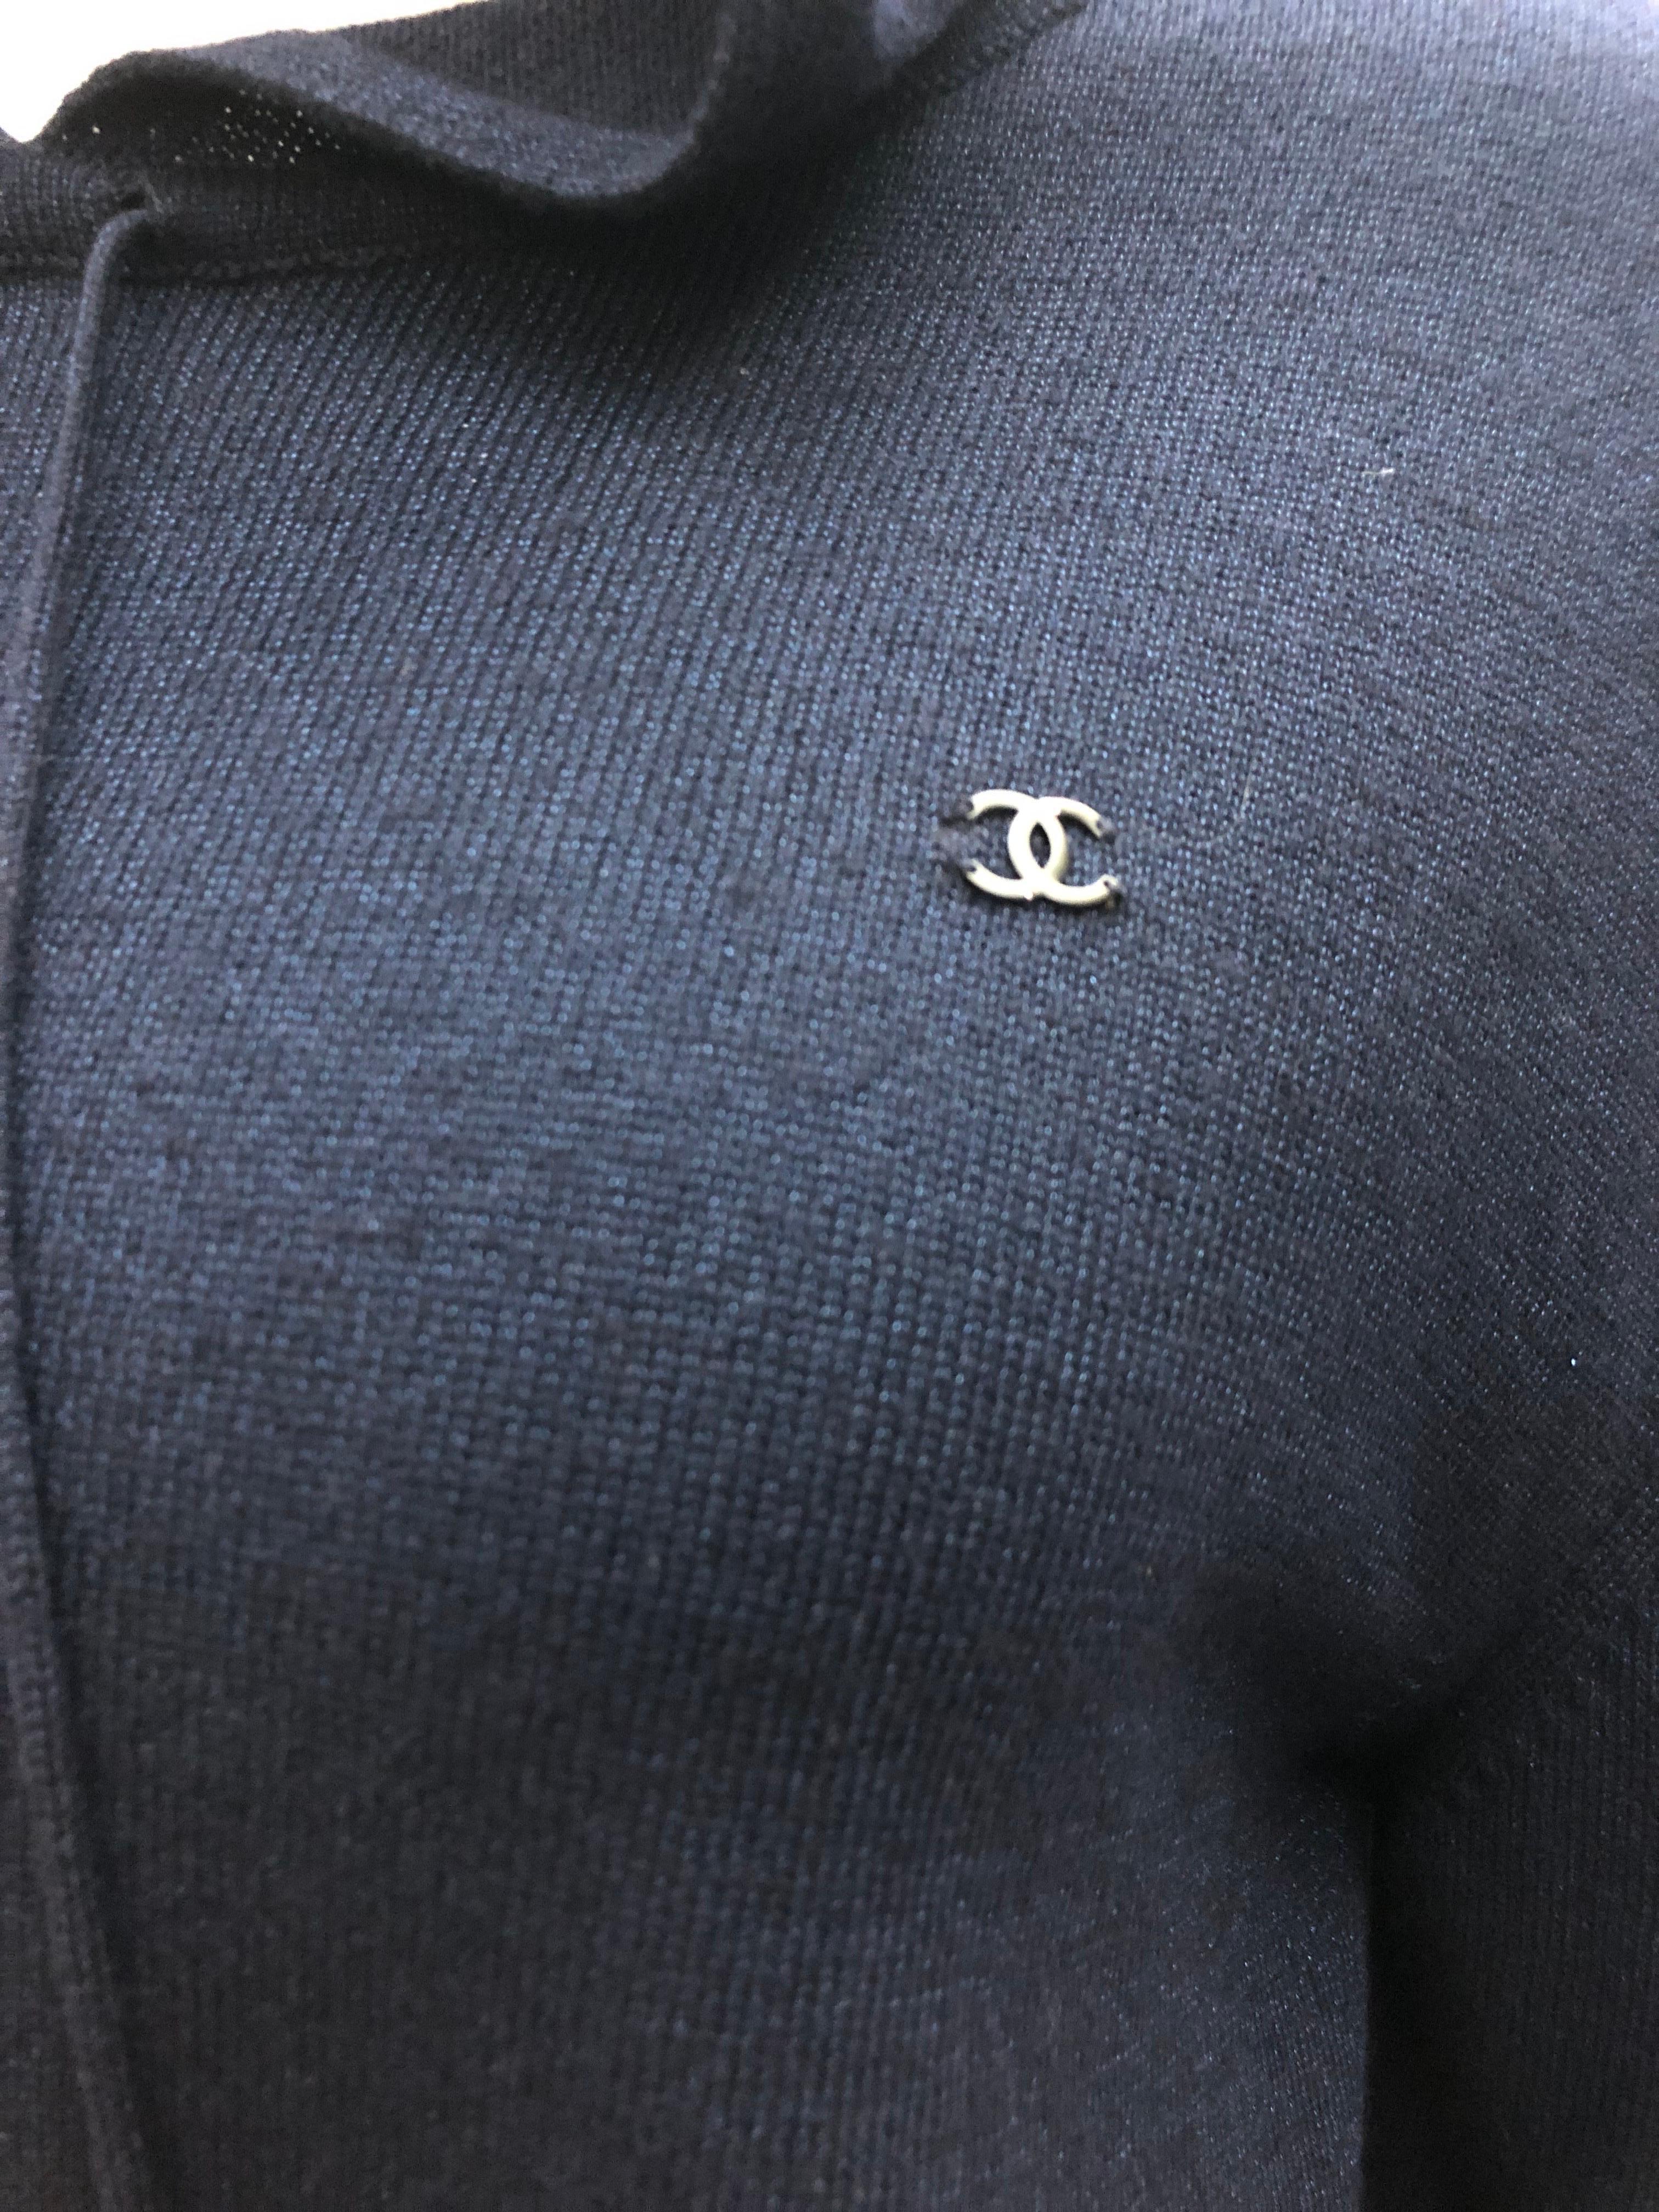 - This causal chic Chanel wool and cashmere mixed sweater  from 1998 collection. 

- Featuring a drawstring hoodie and silver hardware CC. 

- Size 44. 